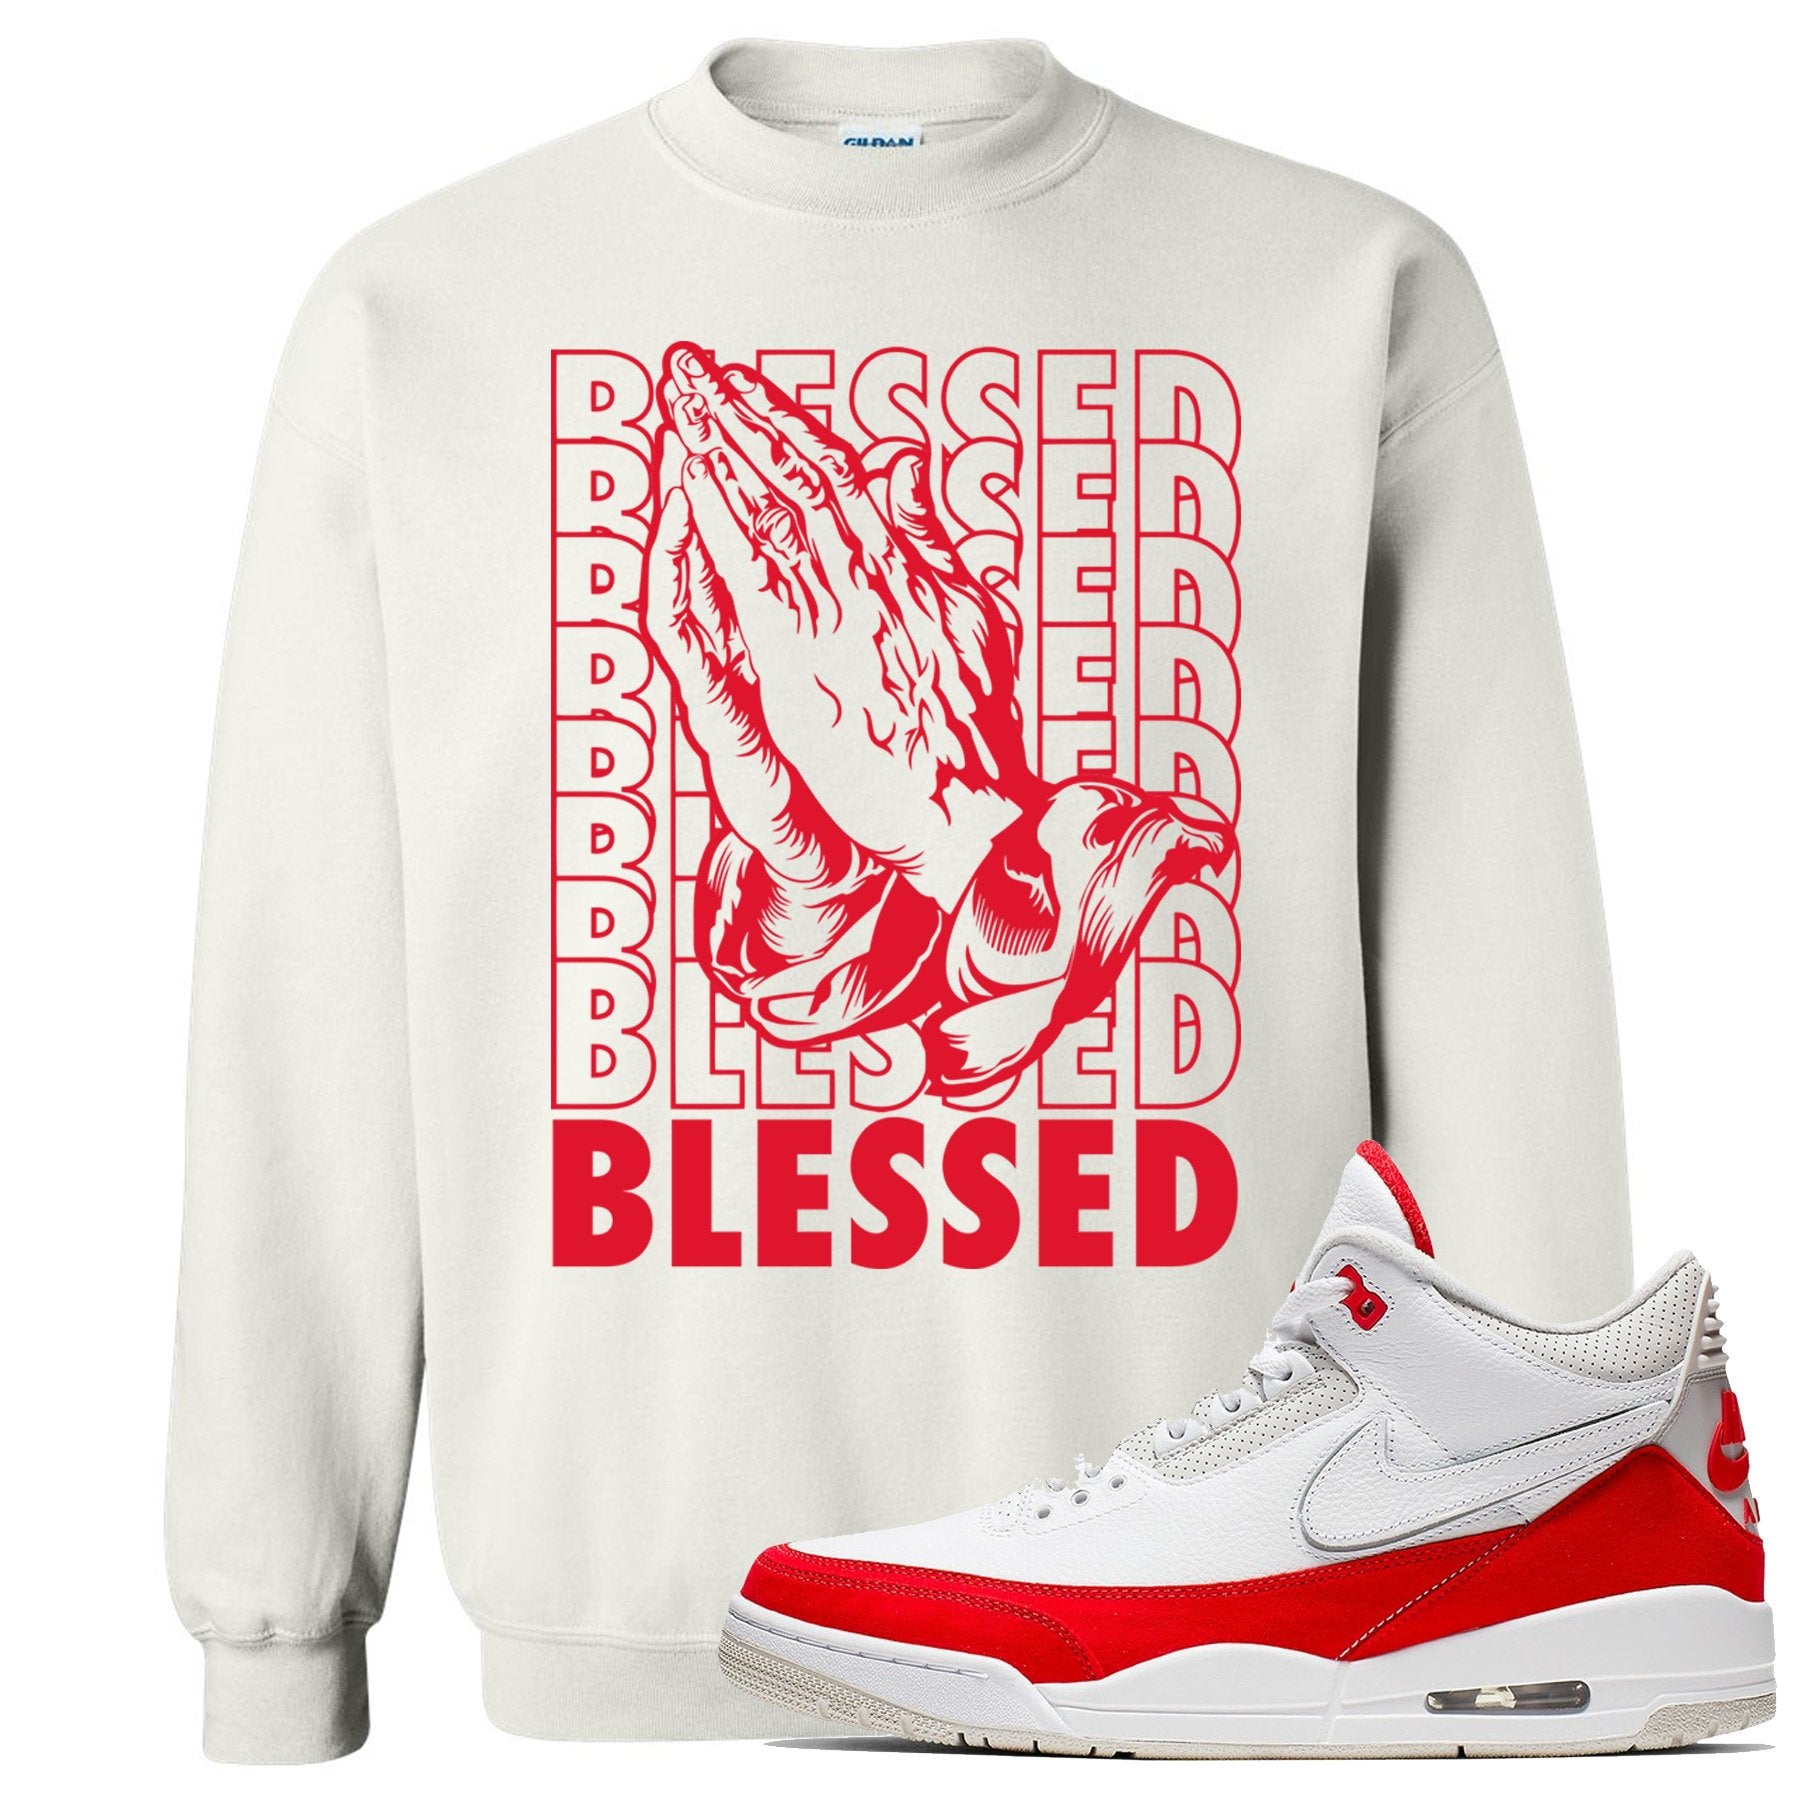 This white and red sweater will match great with your Jordan 3 Tinker Air Max shoes